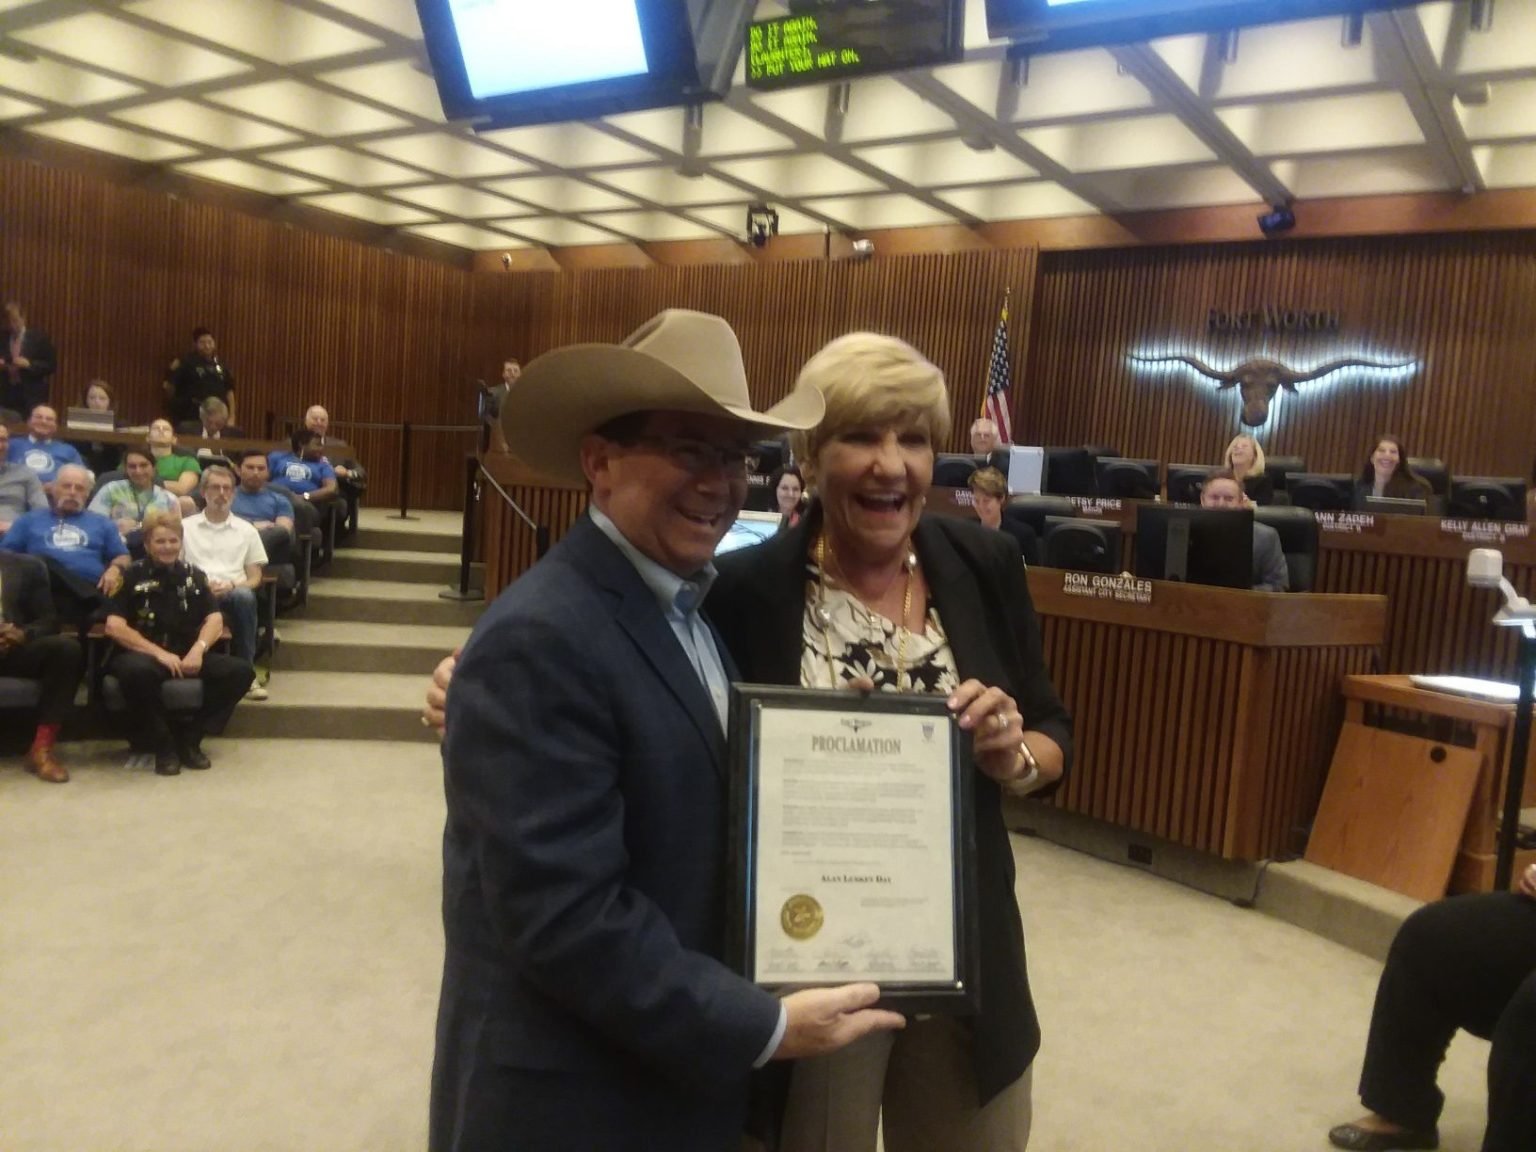  Alan Luskey receiving honor from the city of Fort Worth.  